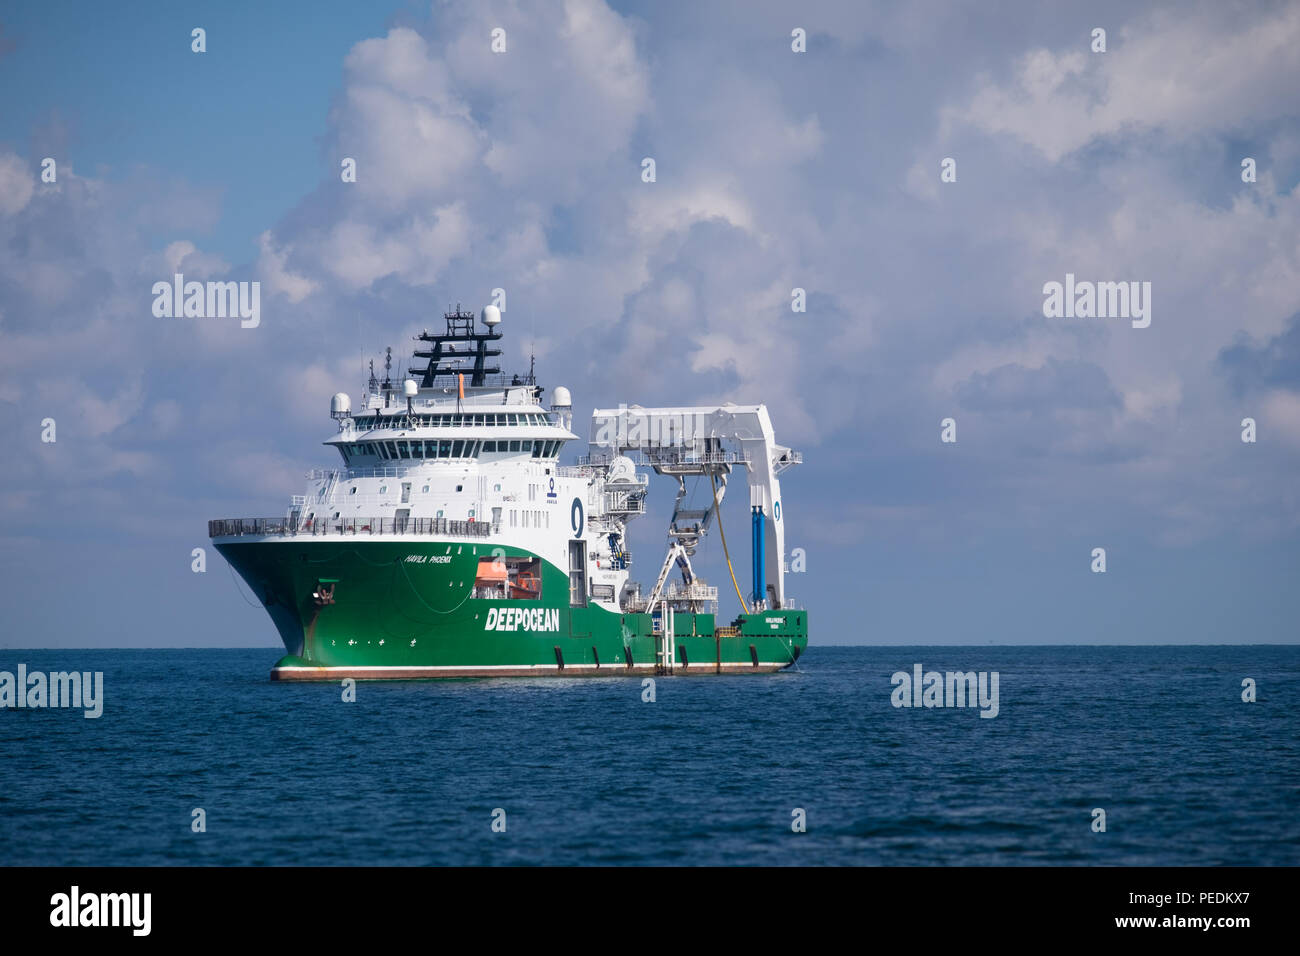 The offshore construction support vessel, Havila Phoenix, working on the Race Bank offshore wind farm in the North Sea, UK Stock Photo